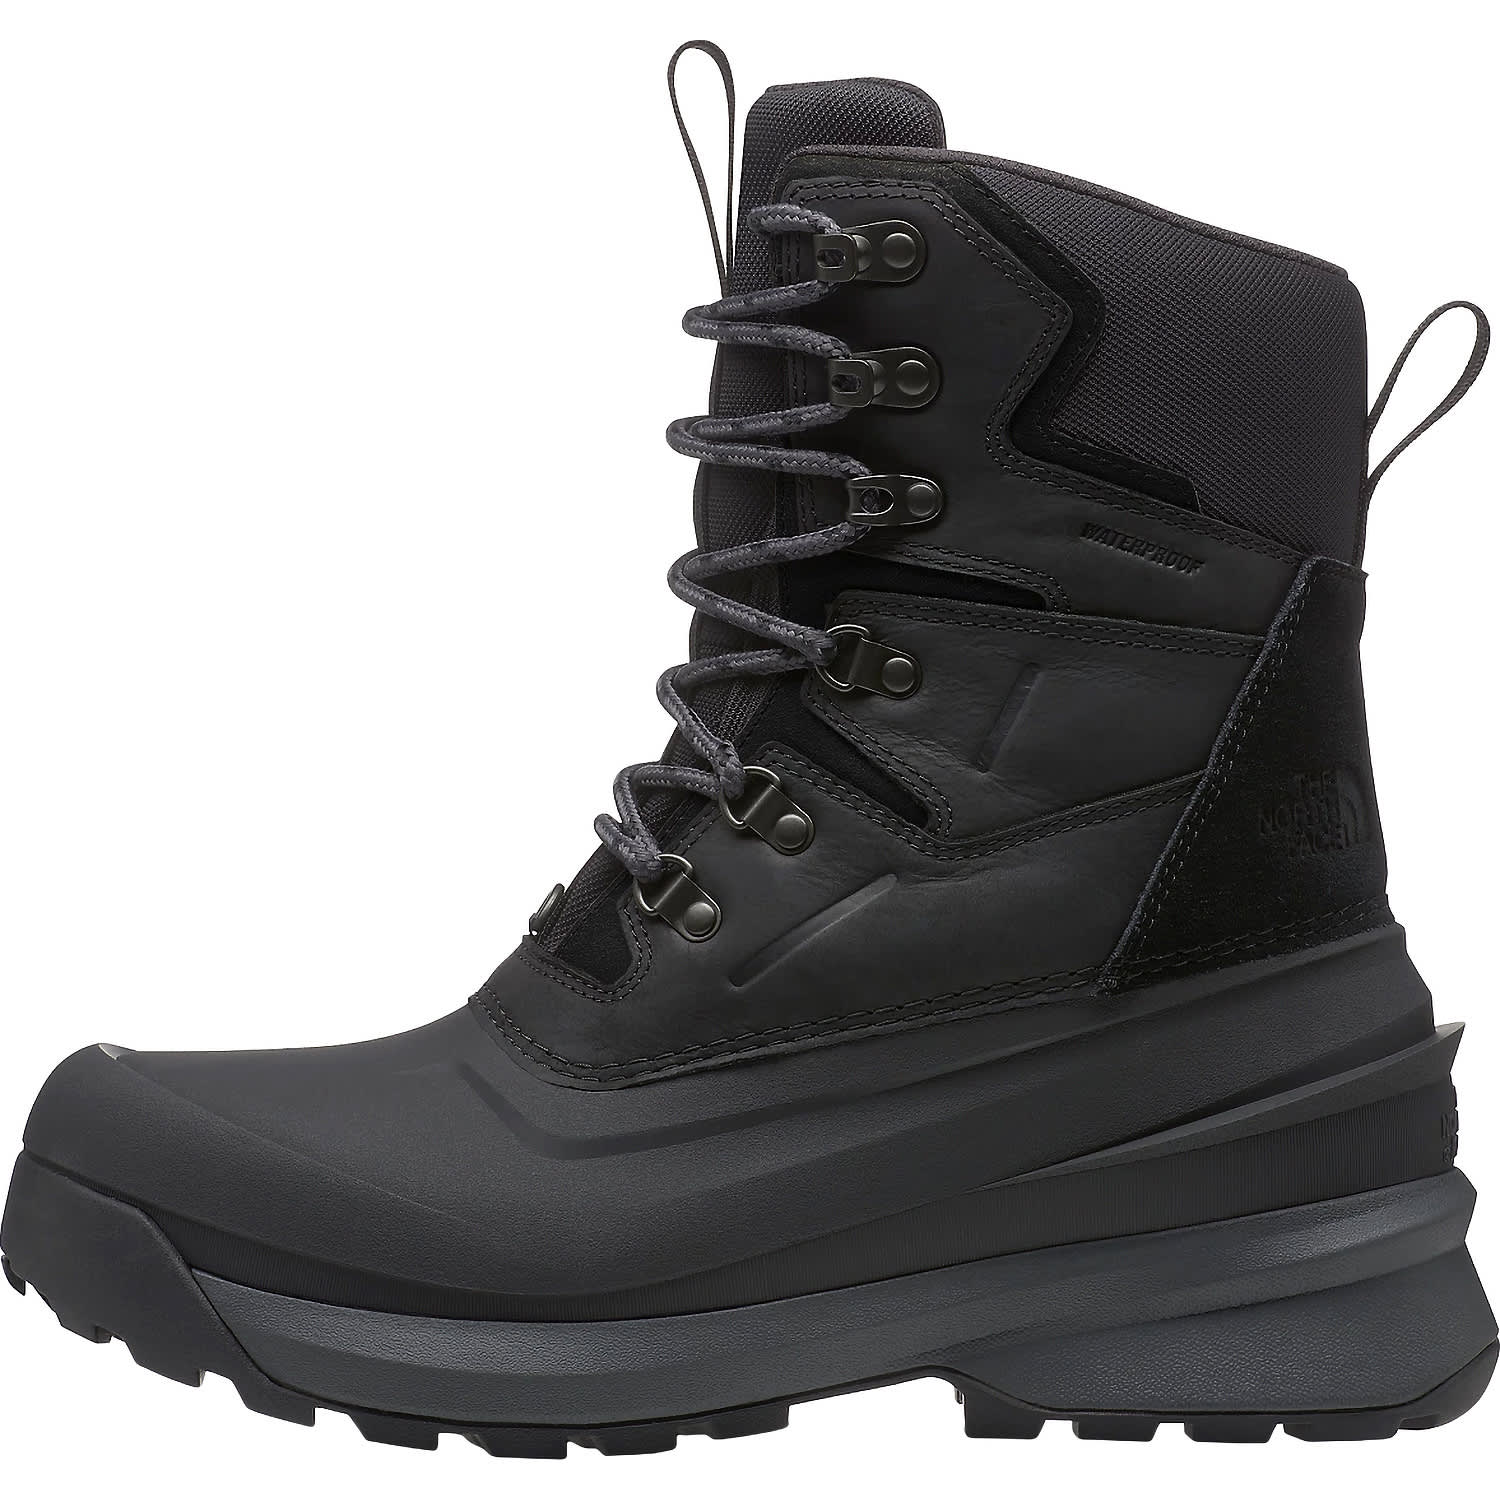 The North Face® Men’s Chilkat V 400 Waterproof Boots